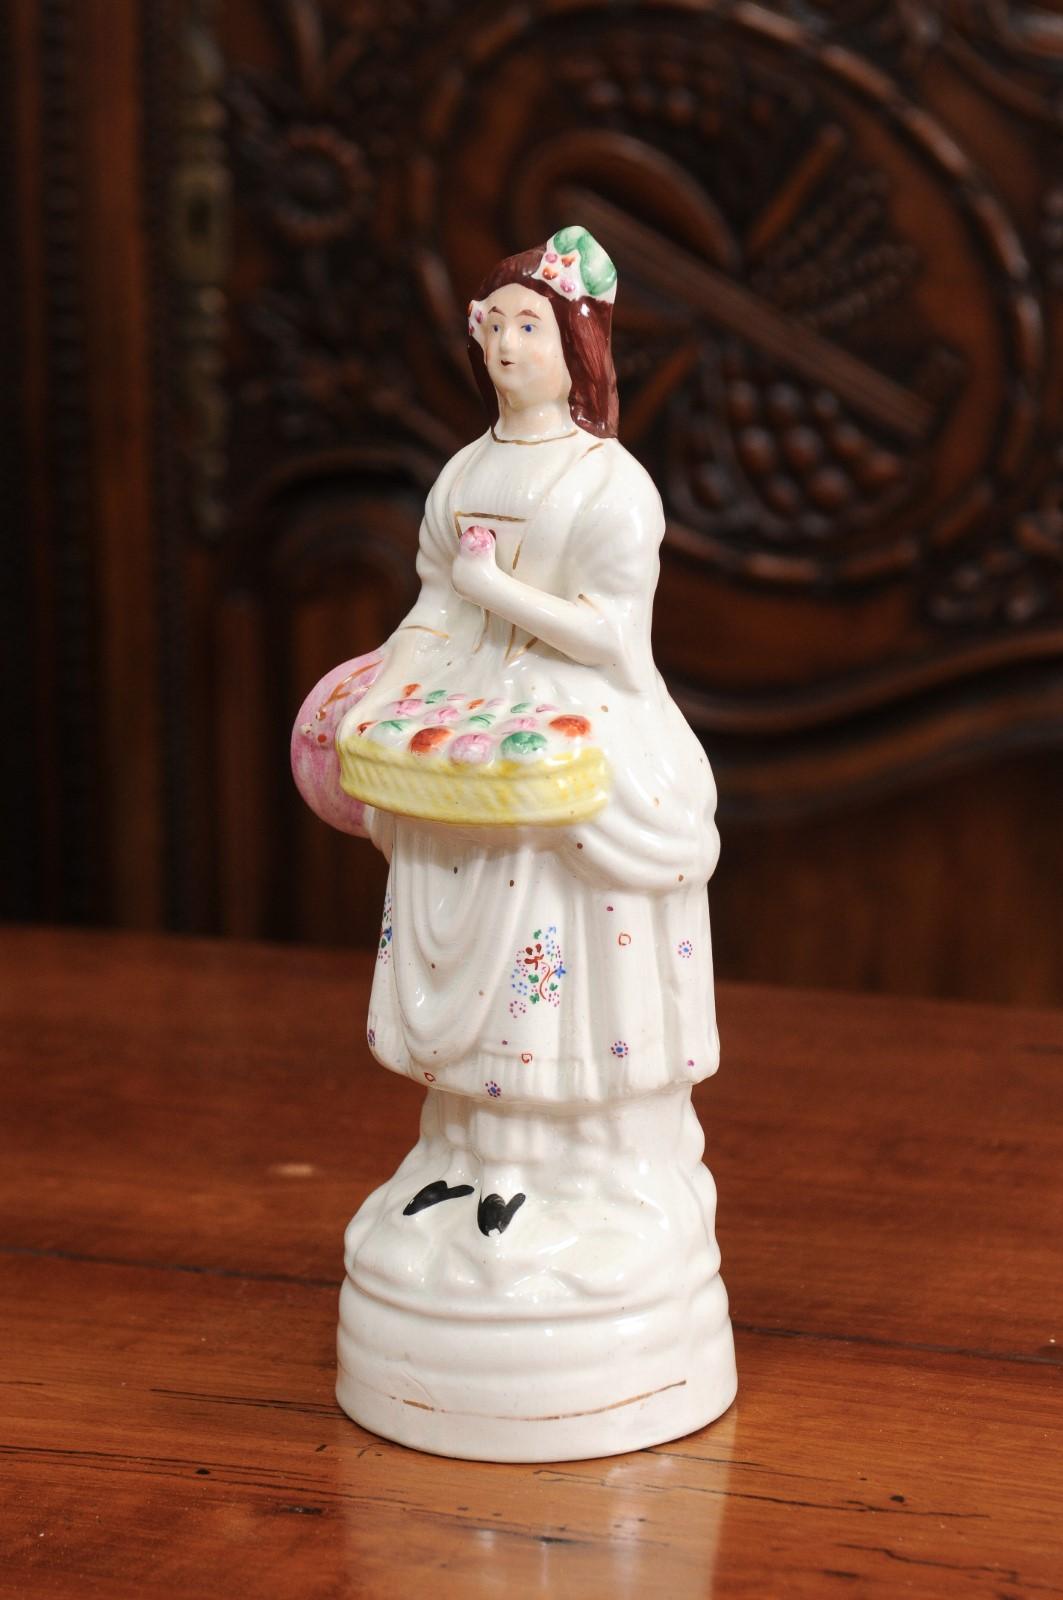 Petite English Porcelain Decorative Object Depicting a Lady with a Floral Basket For Sale 2